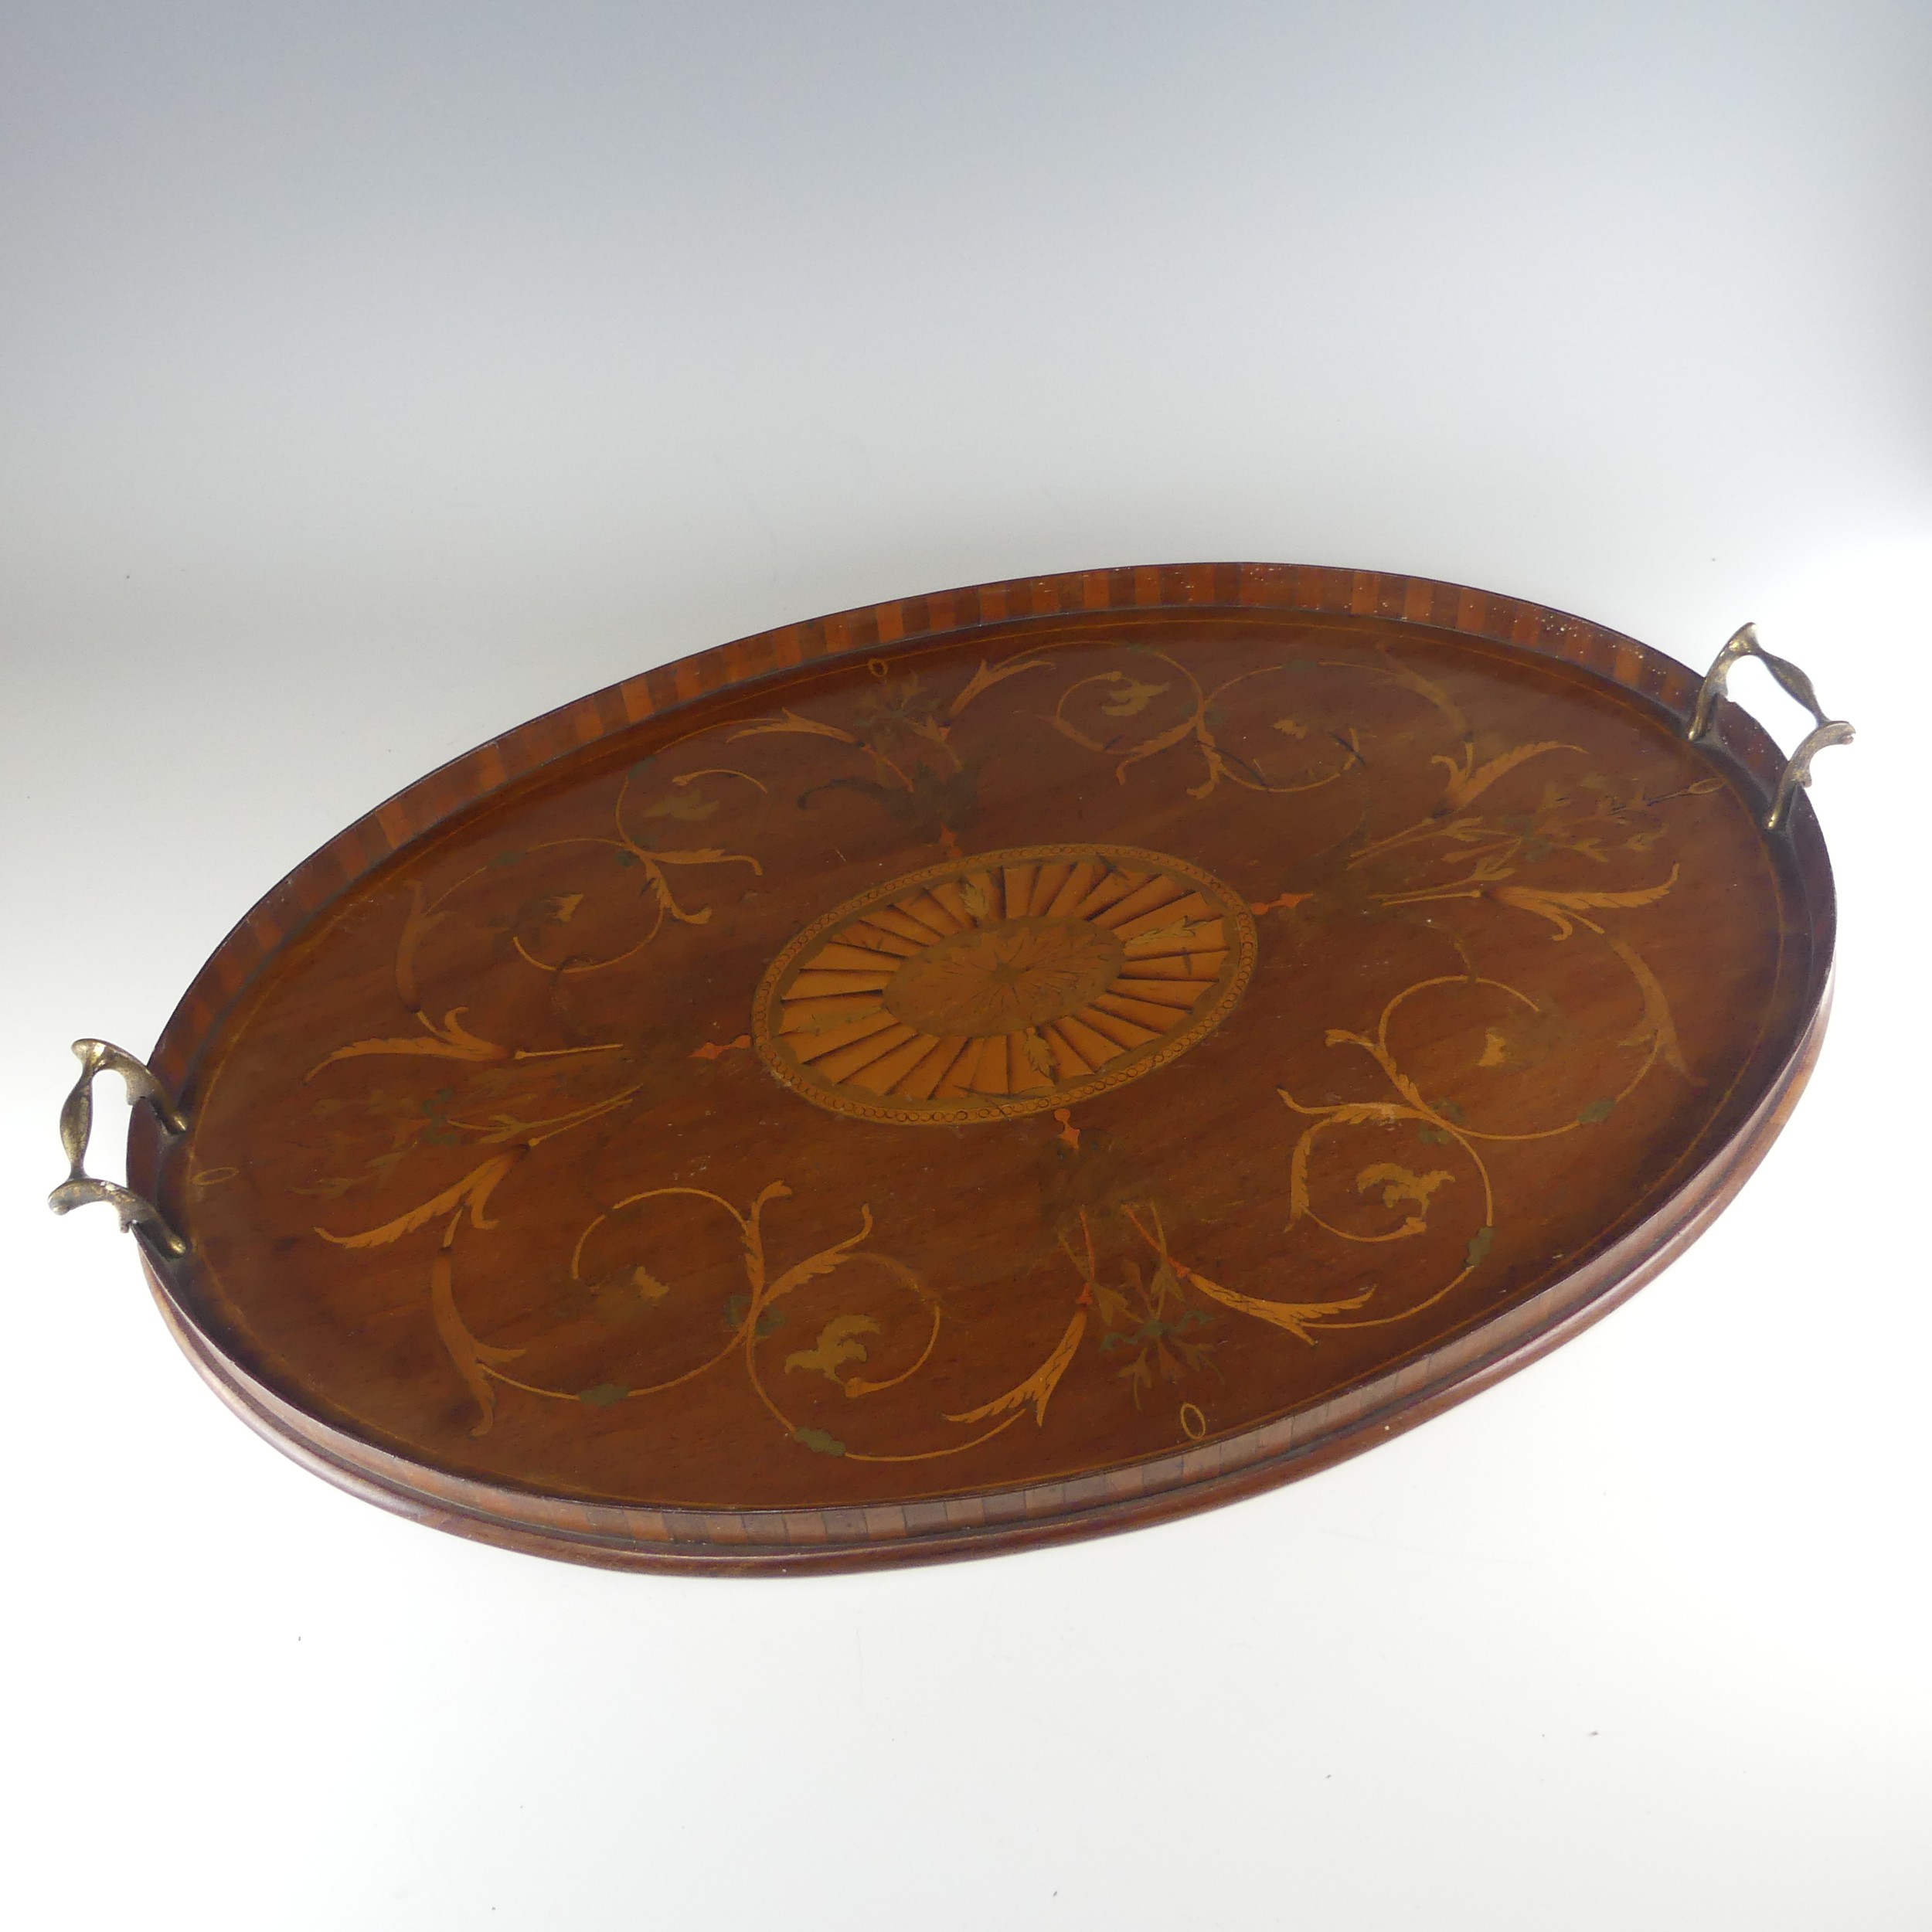 An Edwardian mahogany and marquetry galleried twin-handled Tray, the gallery of chequerboard boxwood